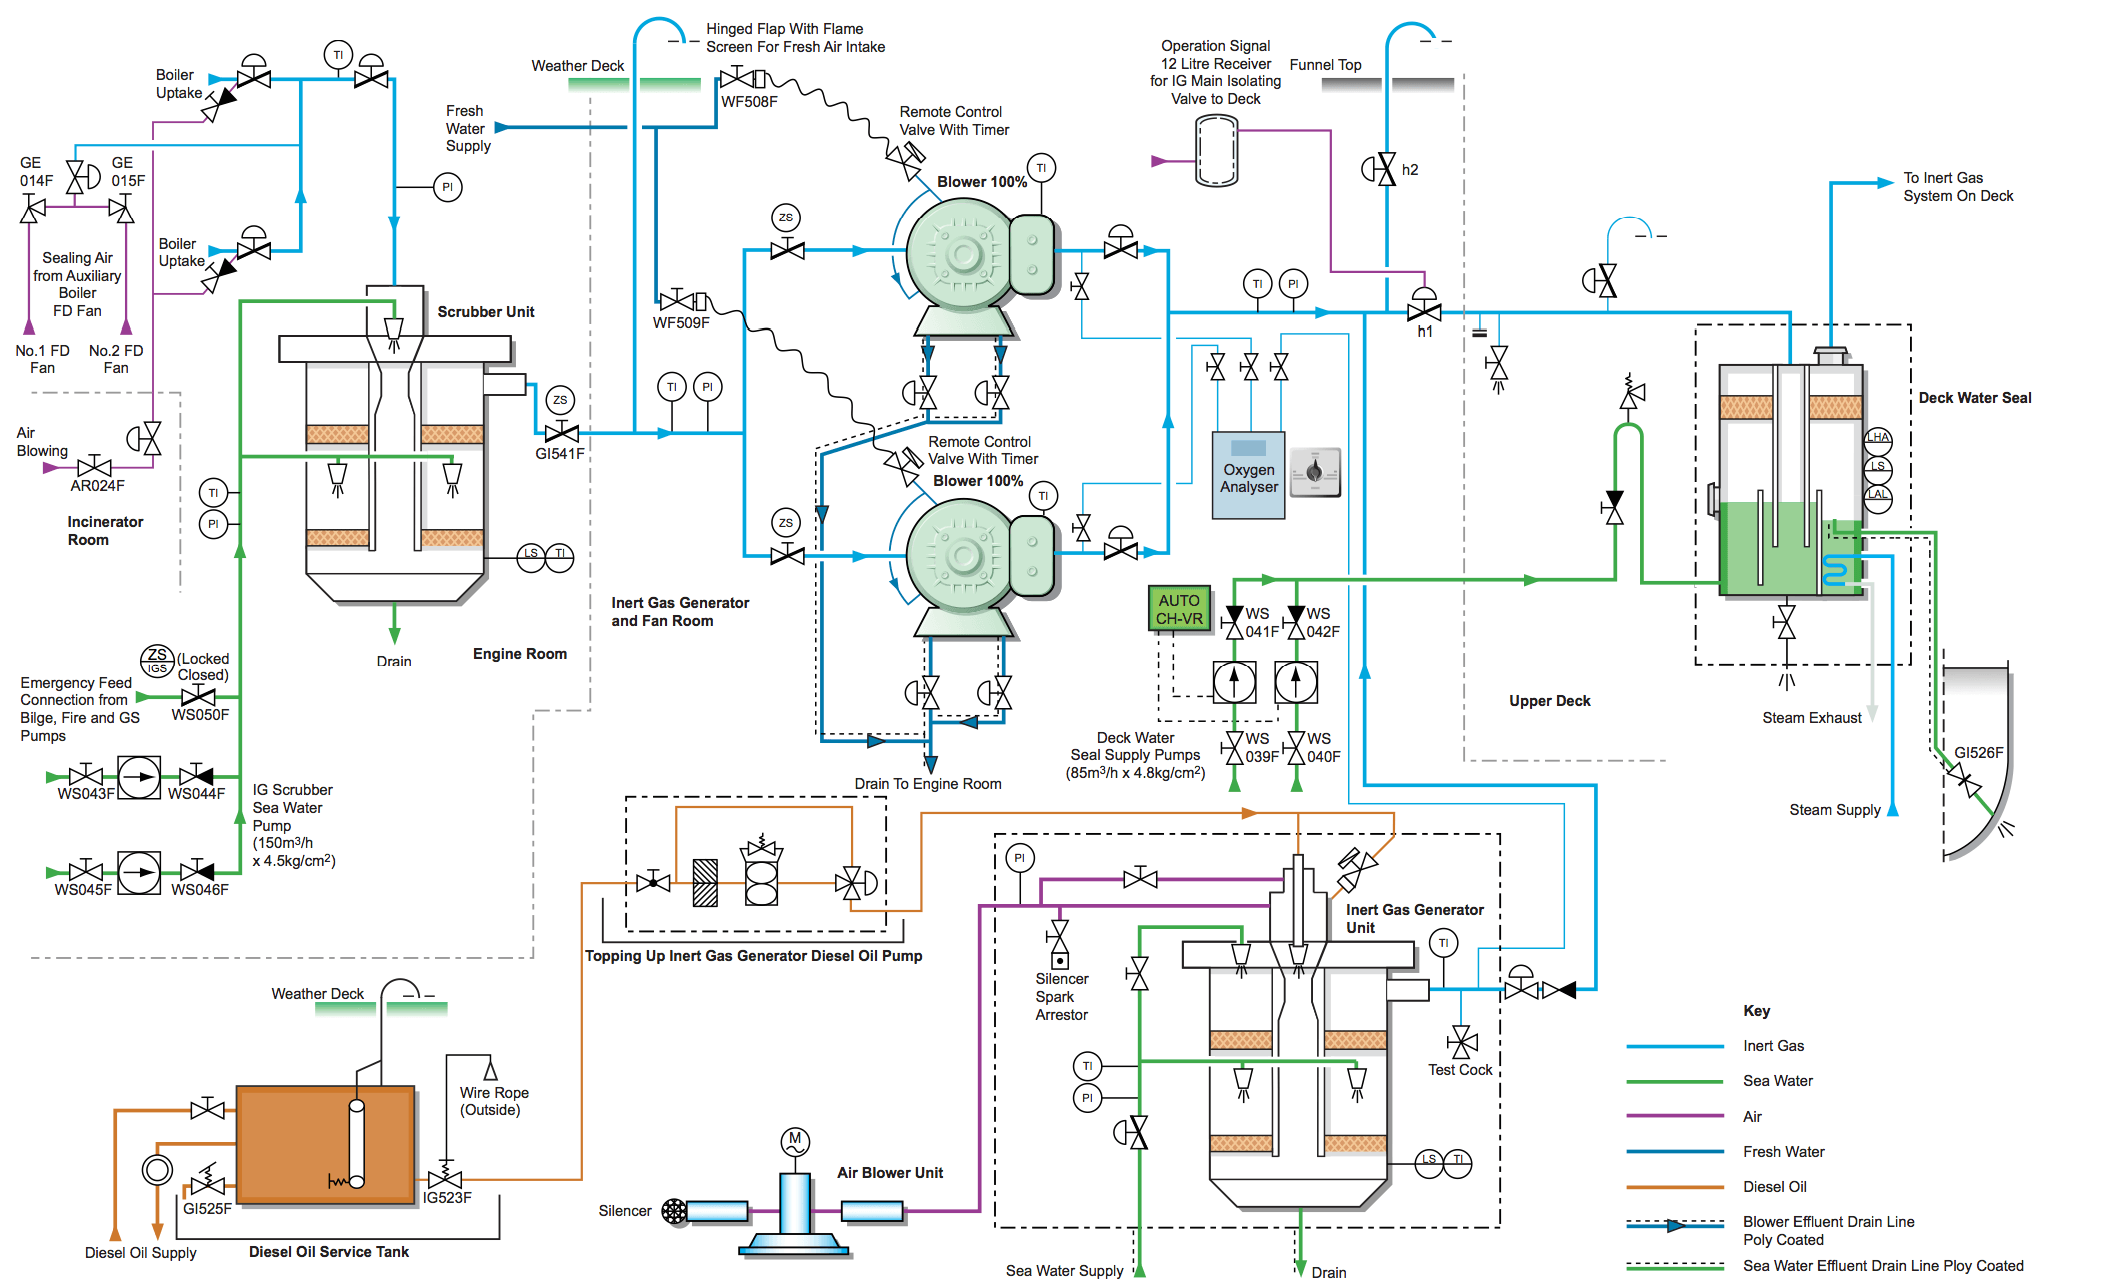 How to Draw and Read Line Diagrams Onboard Ships?